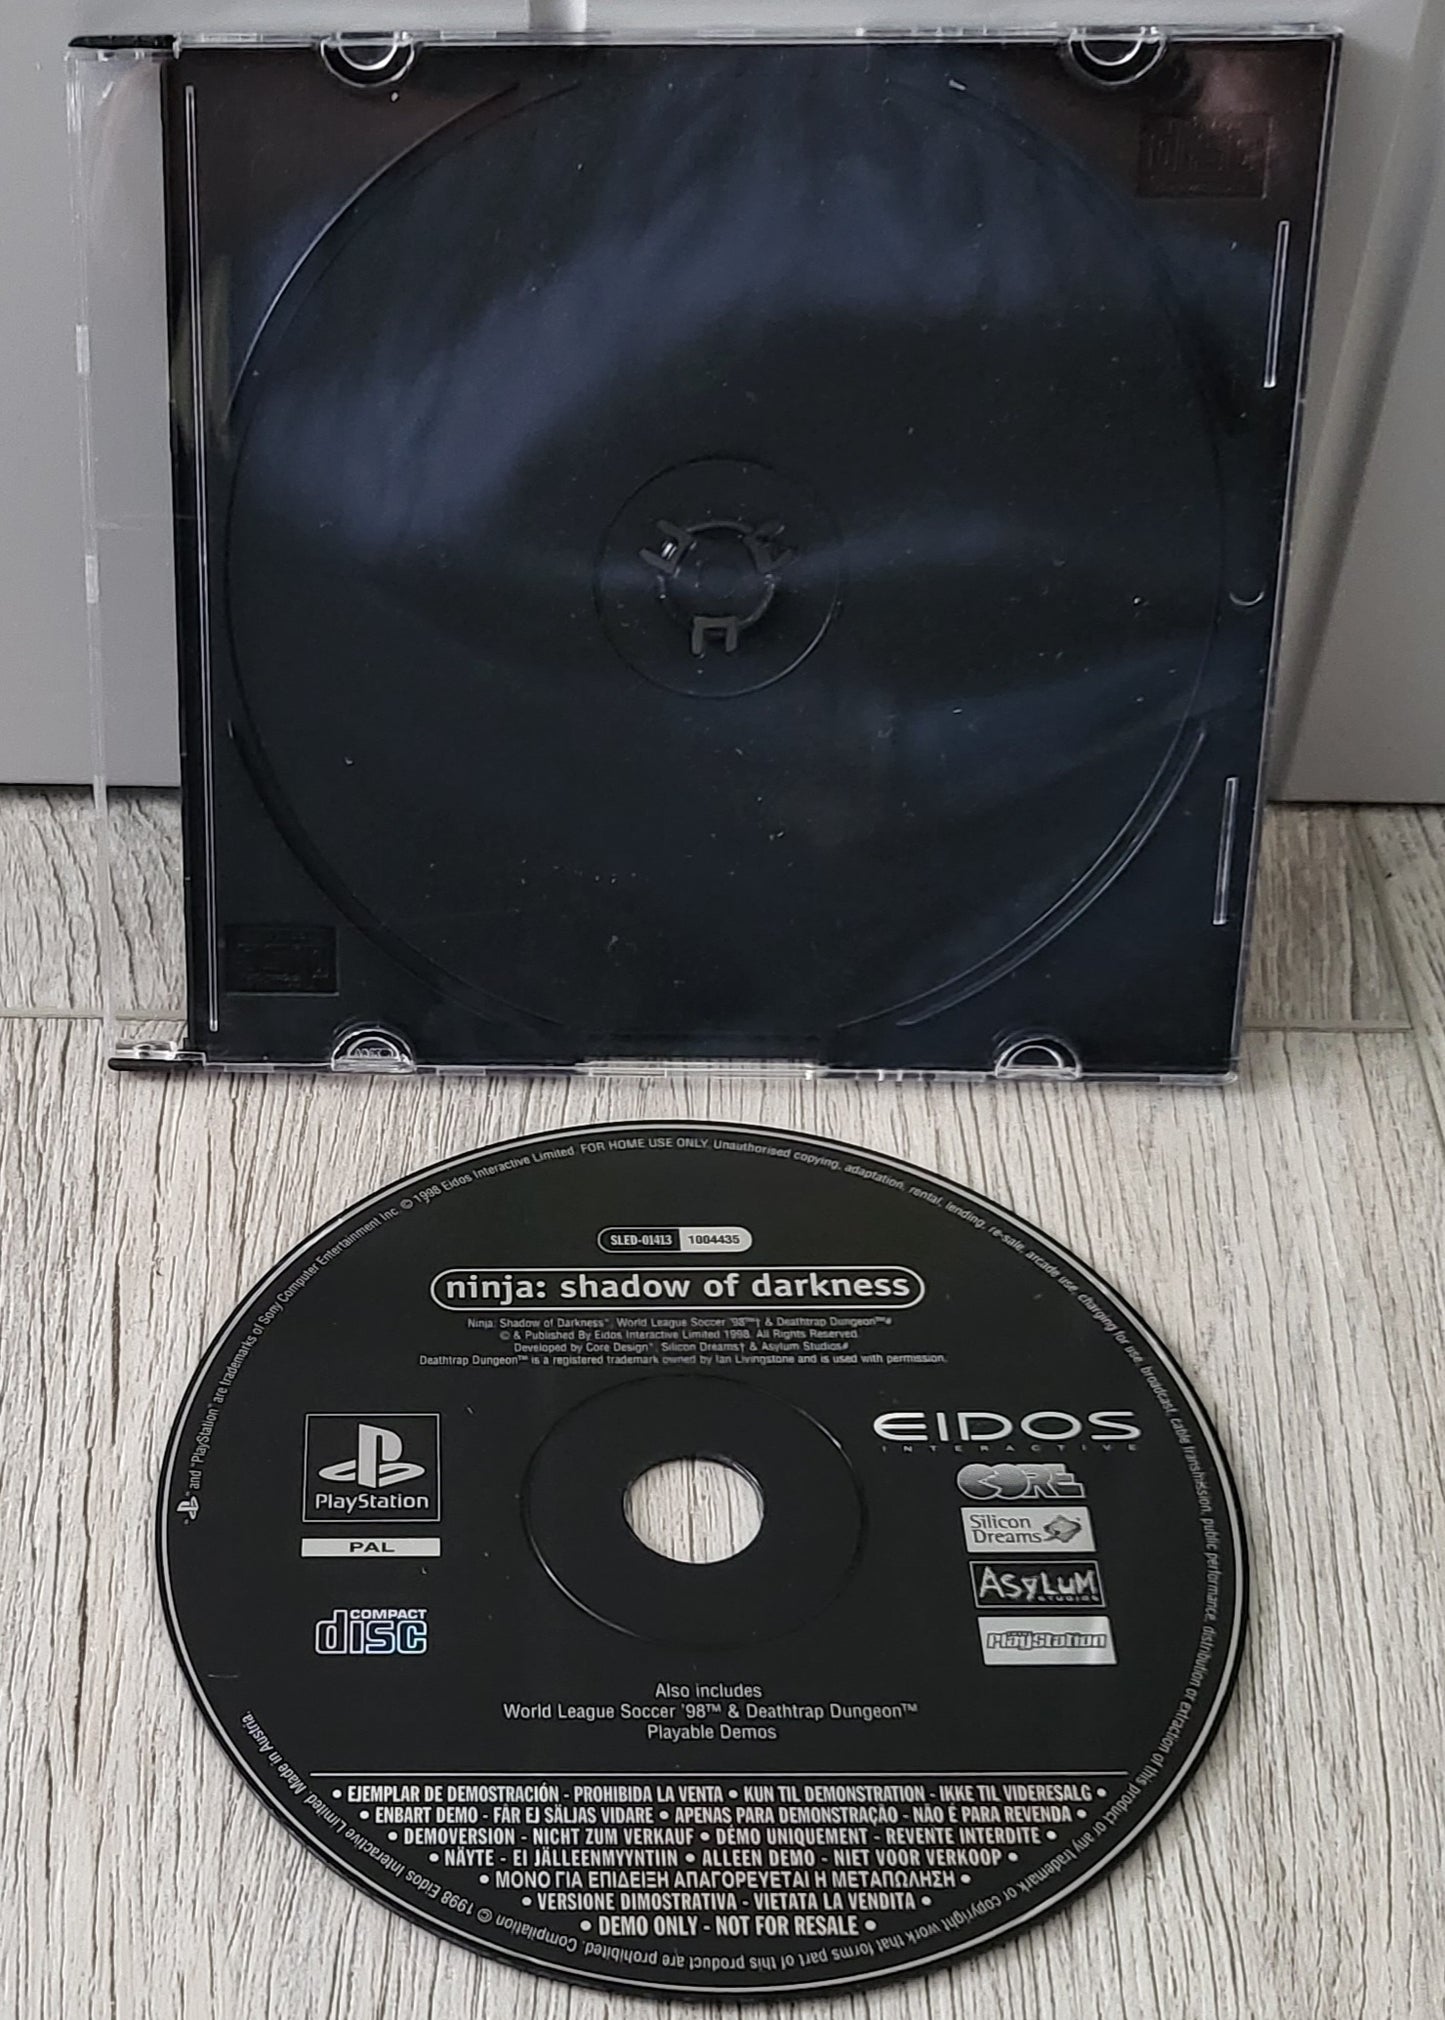 Ninja Shadow of Darkness Demo Sony Playstation 1 (PS1) Game Disc Only